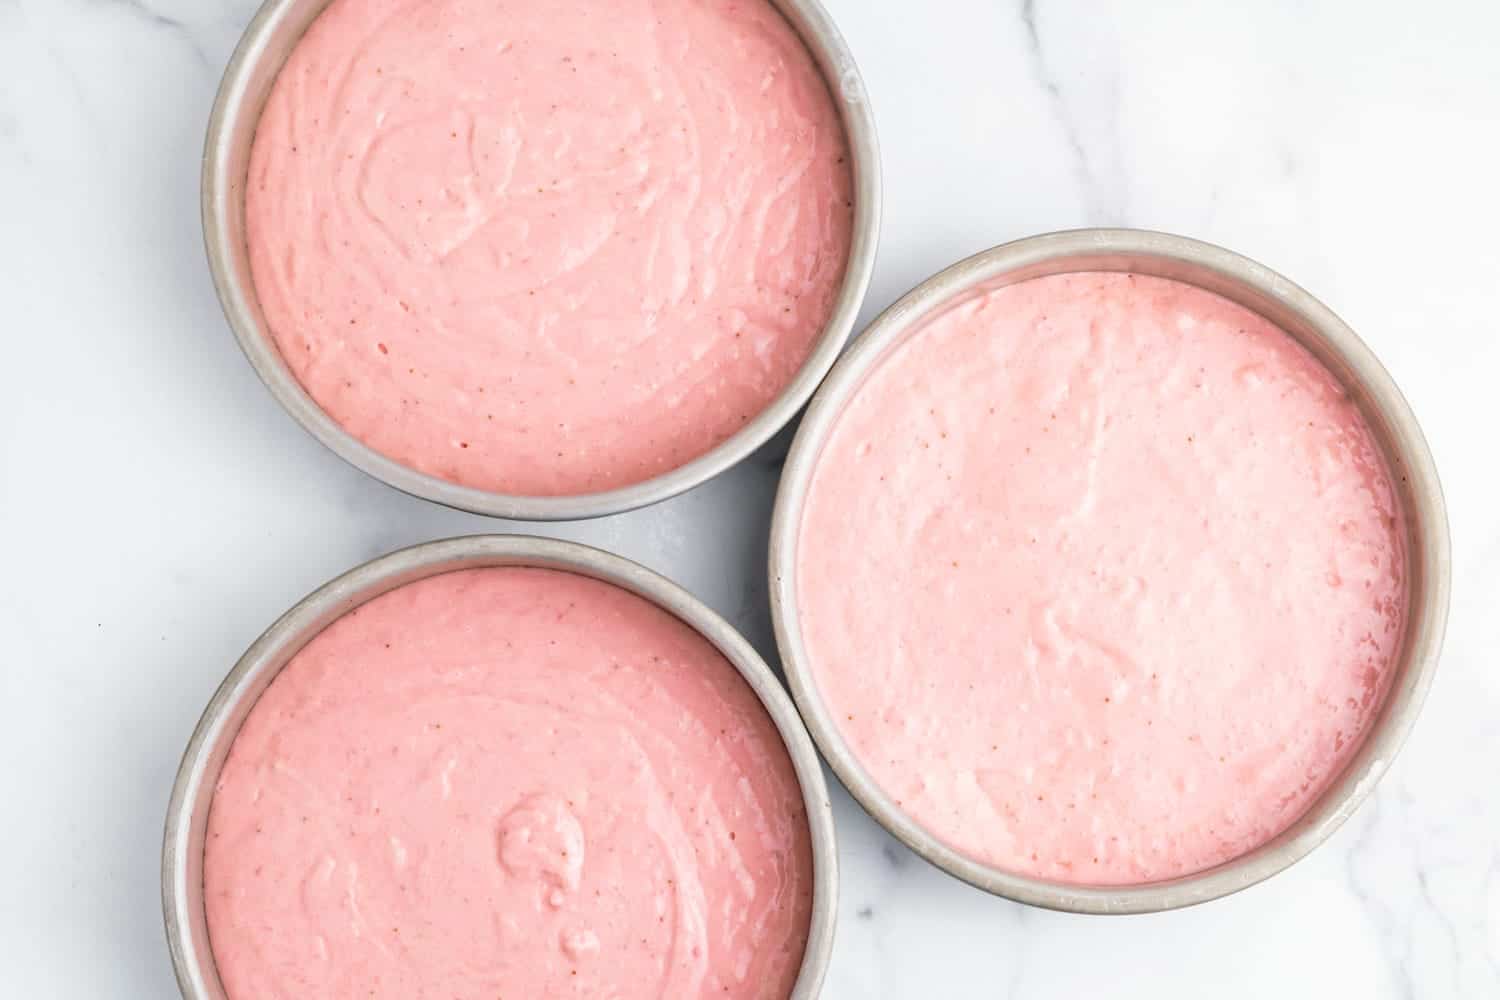 Strawberry cake batter divided into three round cake pans.